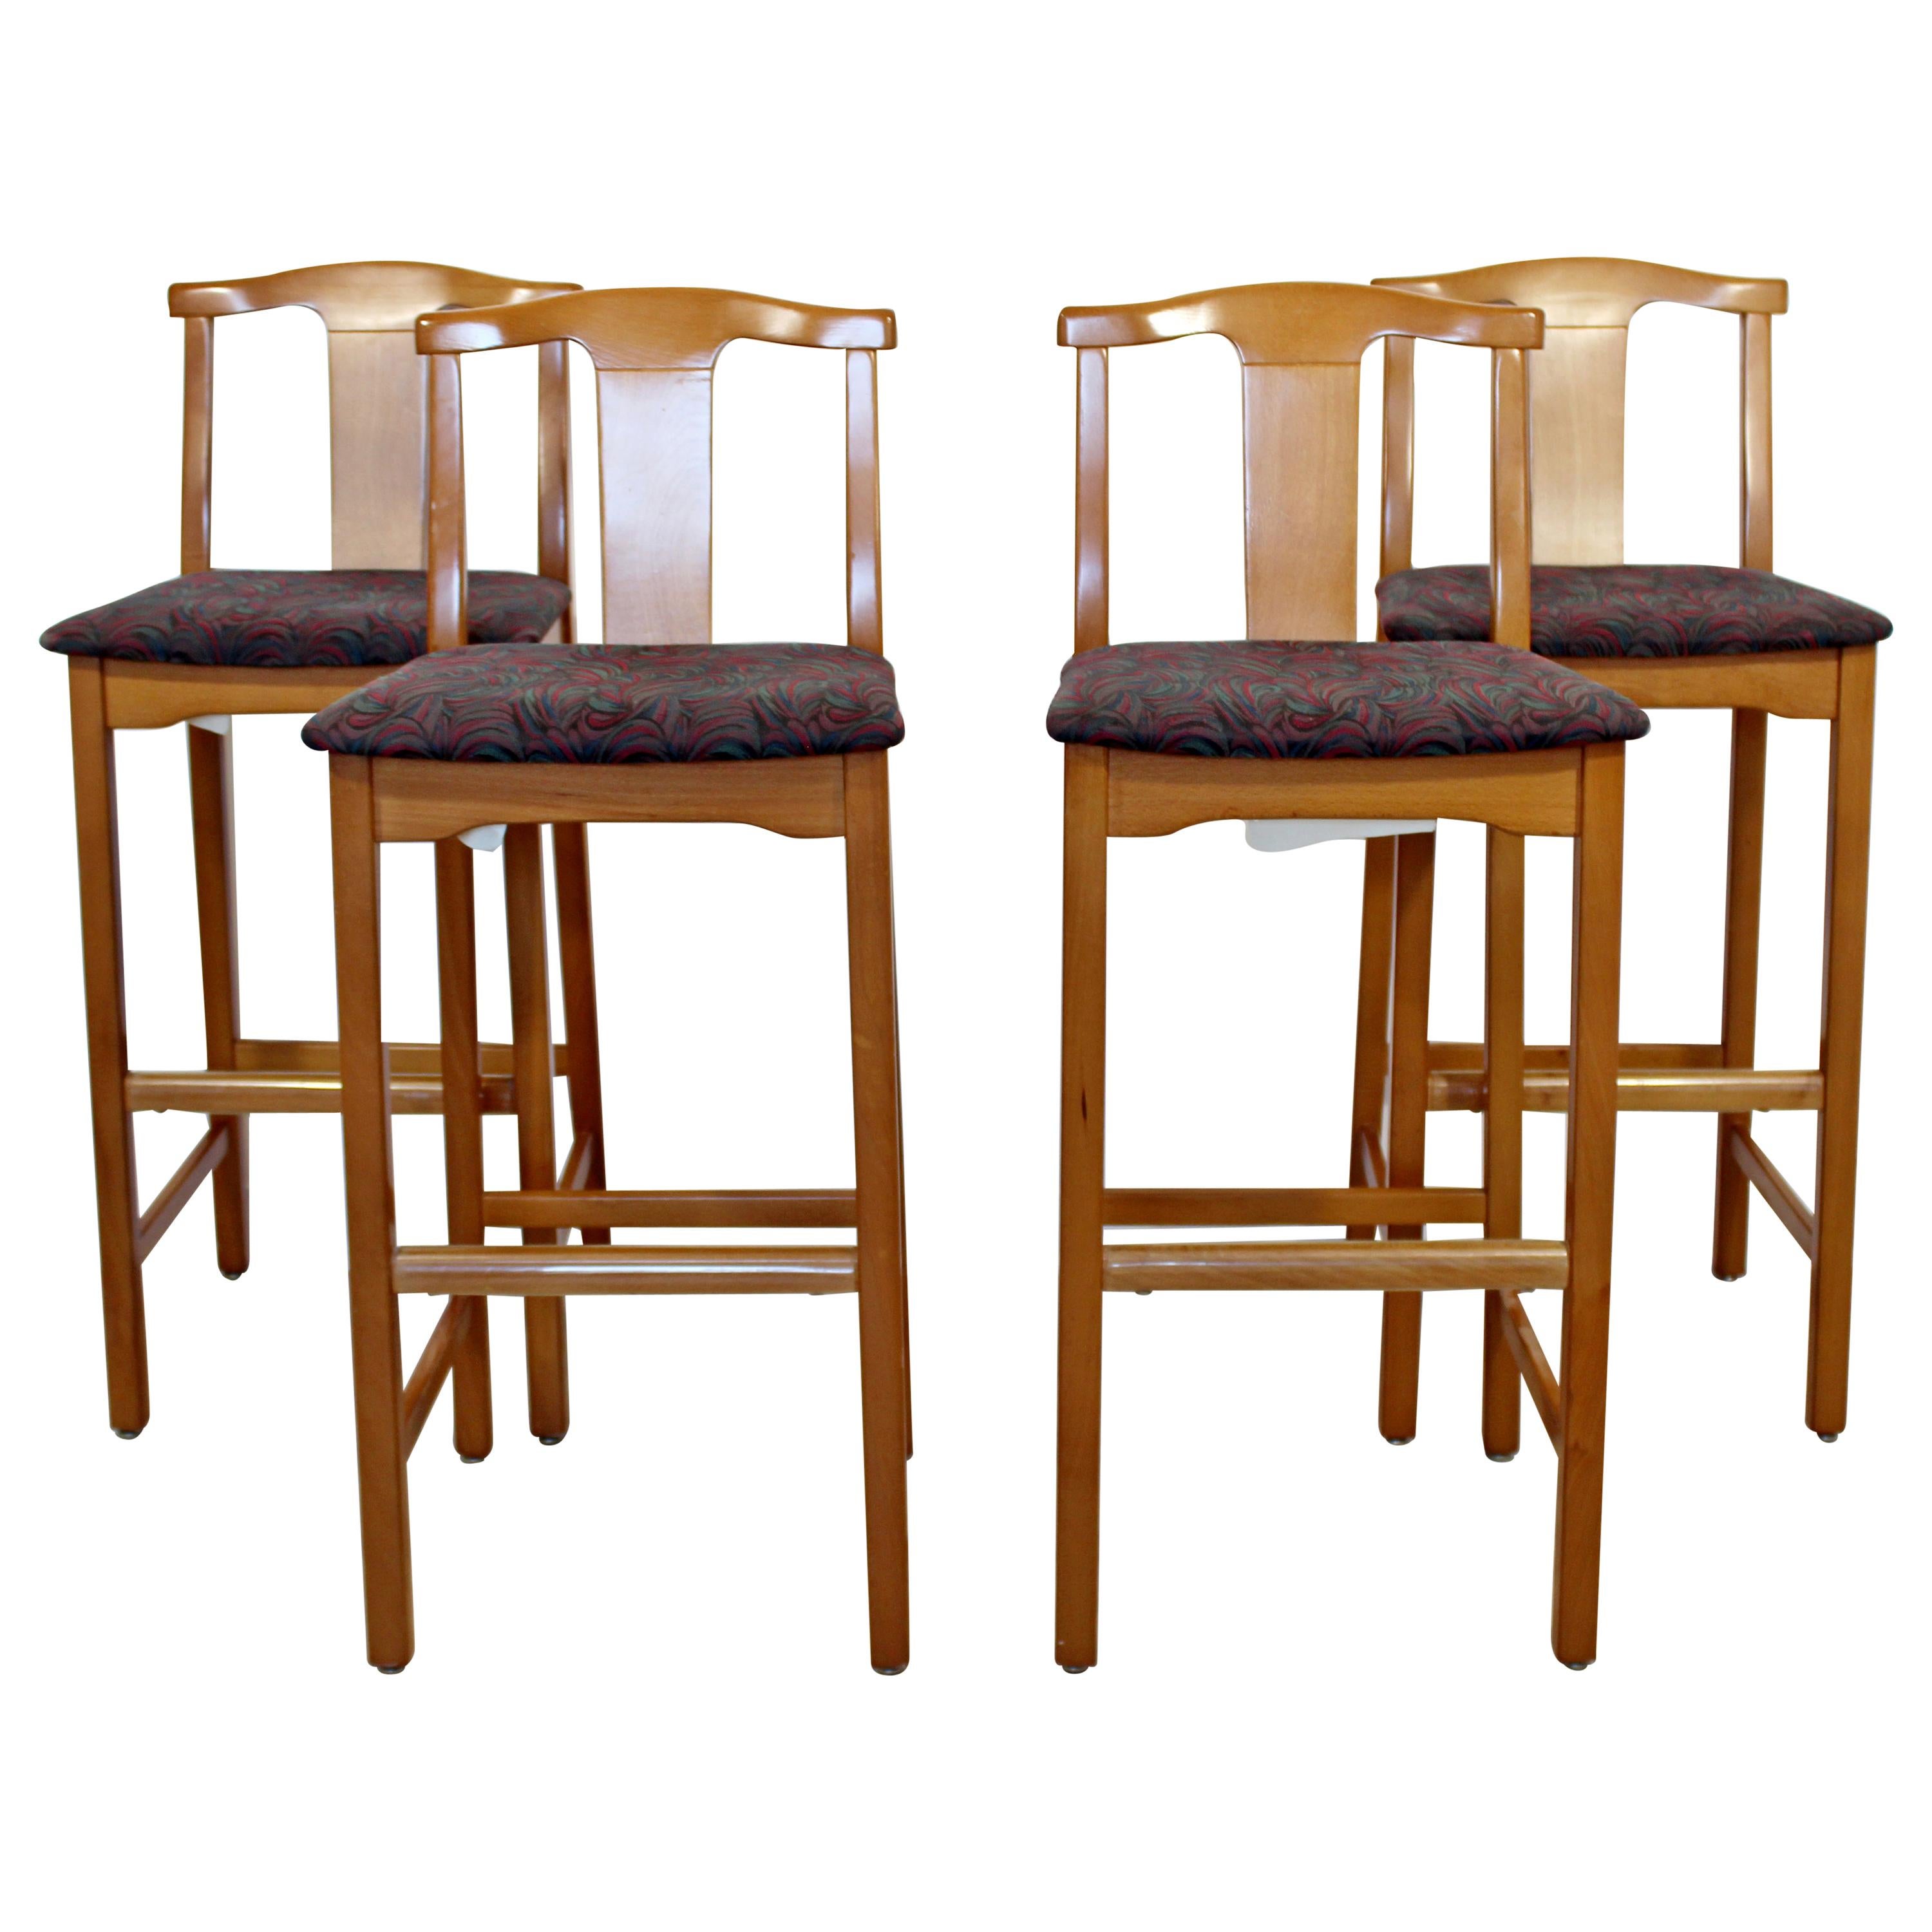 Contemporary Modernist Lowenstein Set of 4 Counter Bar Stools, 1990s For Sale